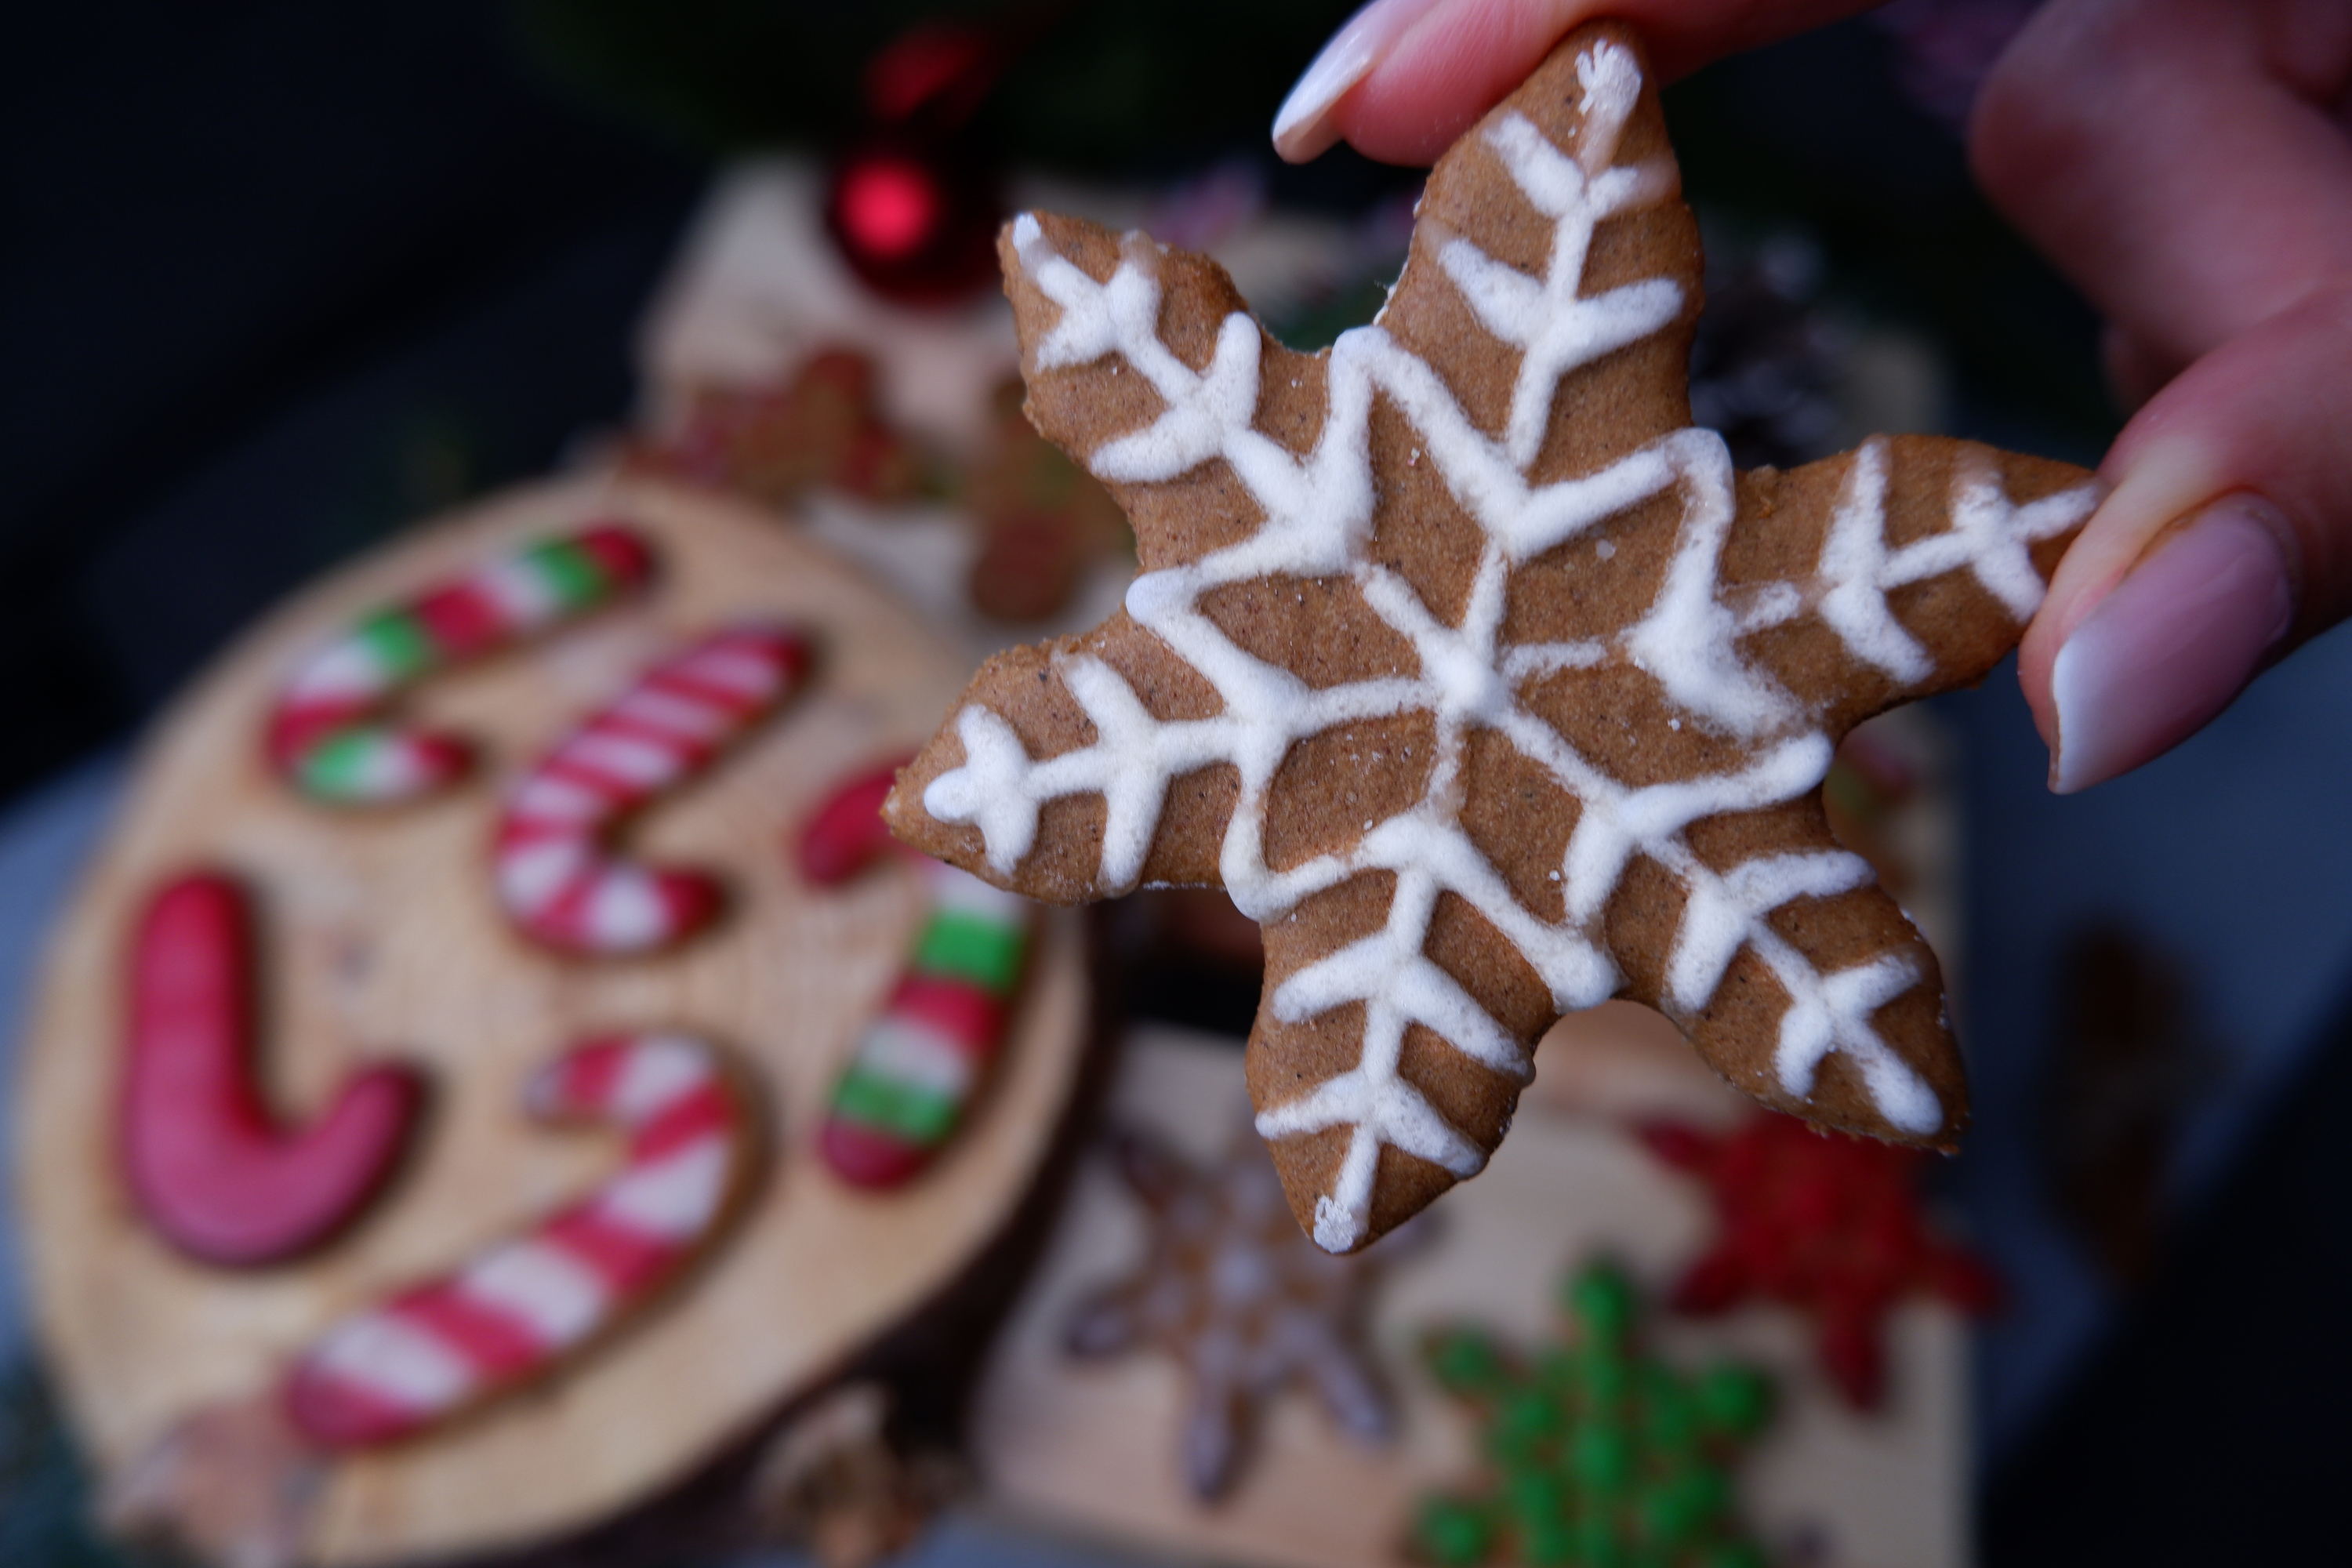 Healthy gingerbread cookies, xylitol healthy icing